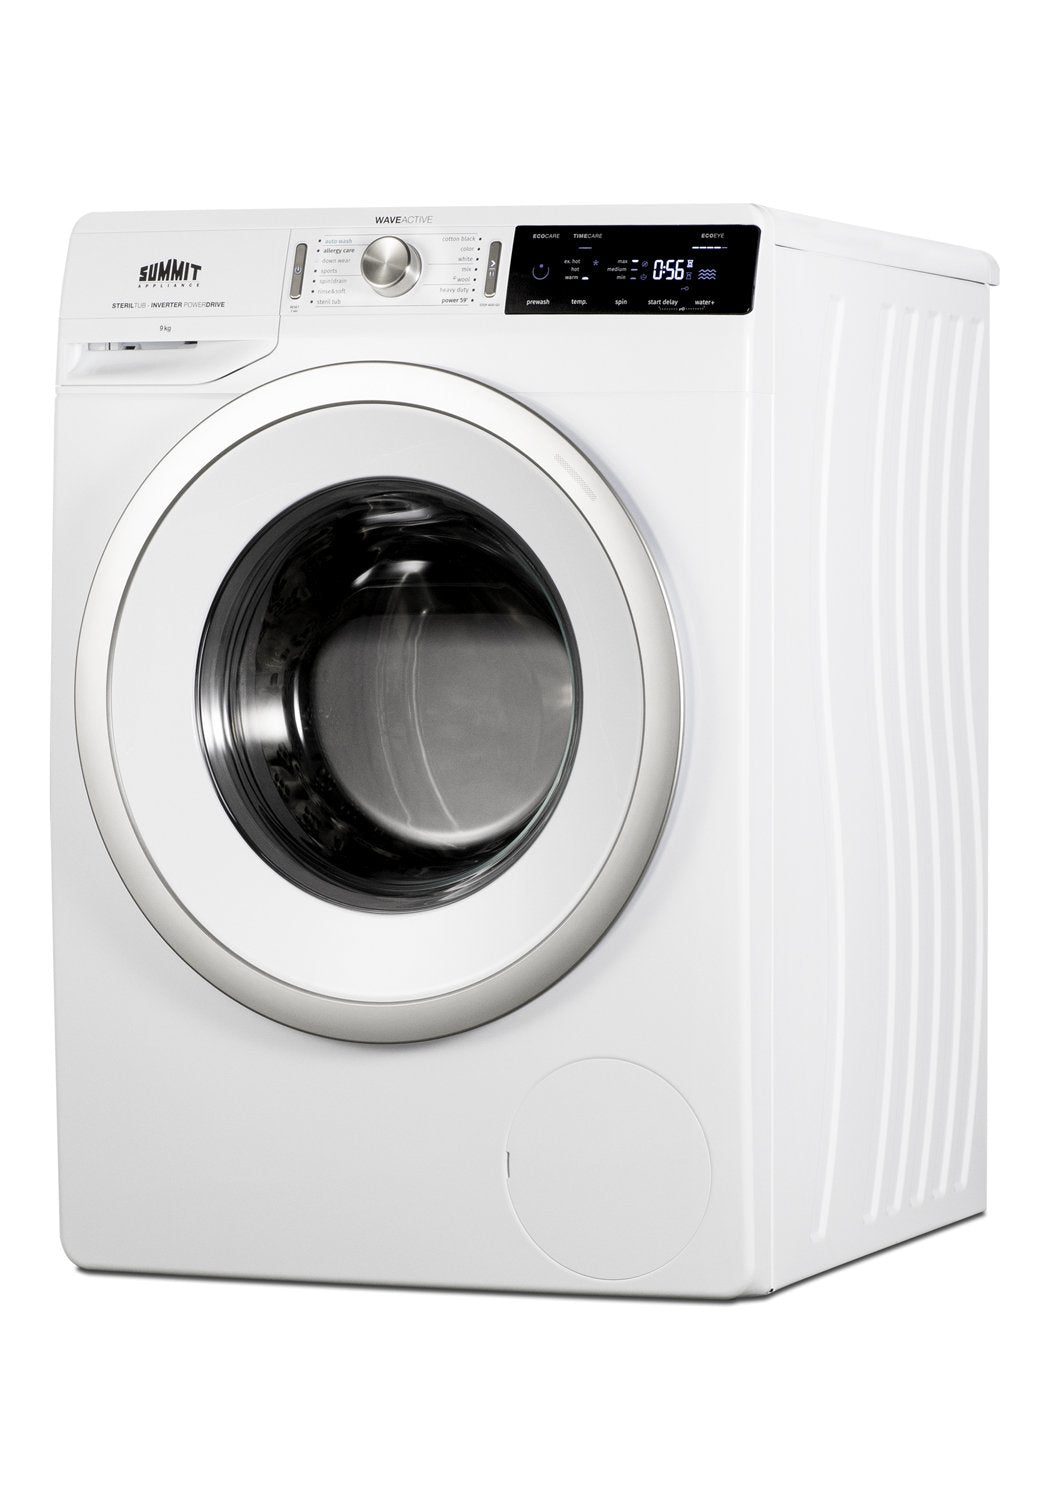 SUMMIT 24 in. 208-240V Front-Loading Washer (SLW241W)